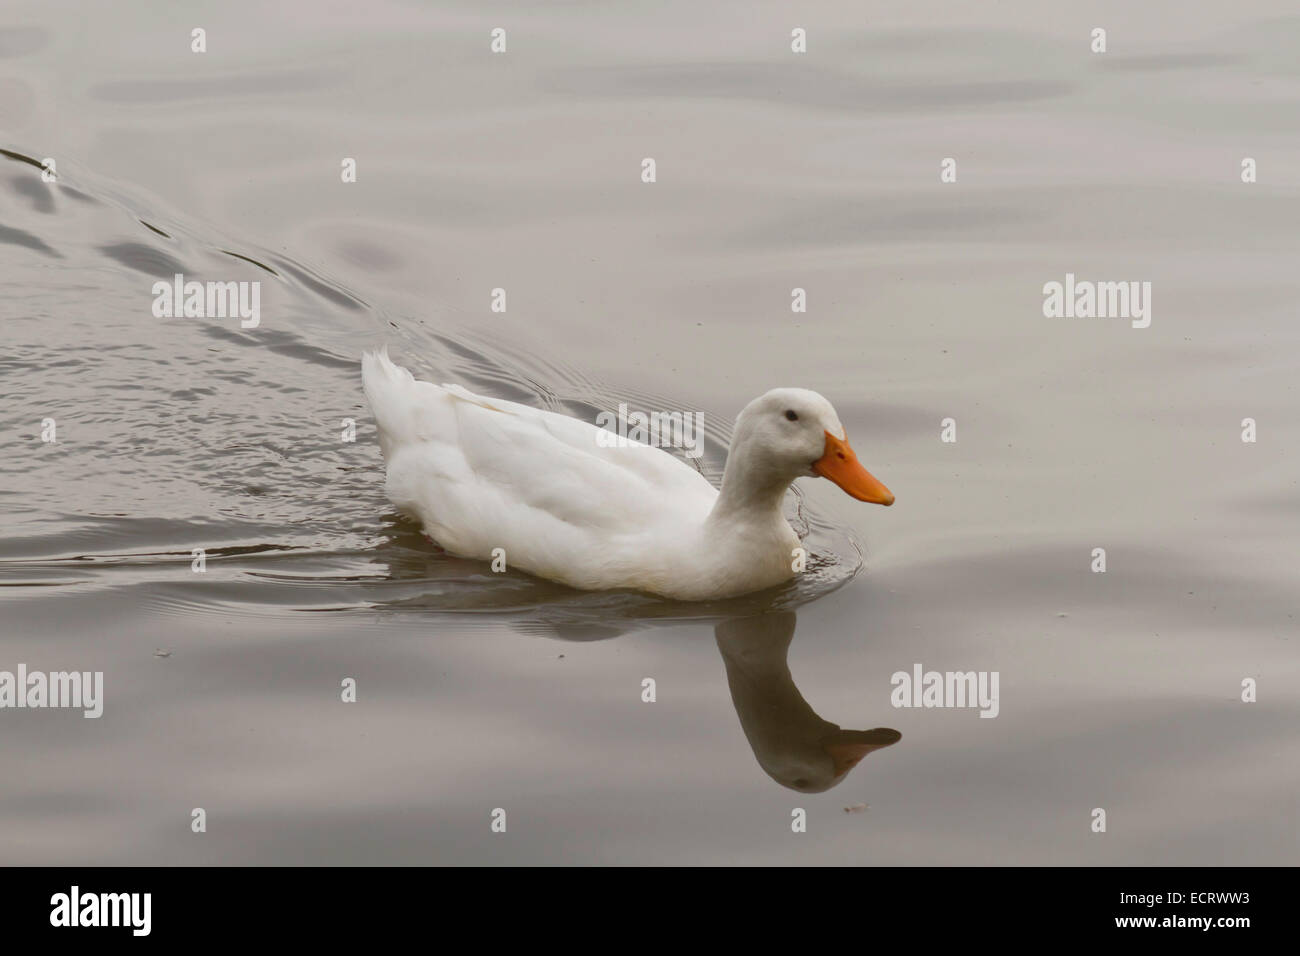 A curious, domestic, tame white duck swims closer to see what's going on Stock Photo